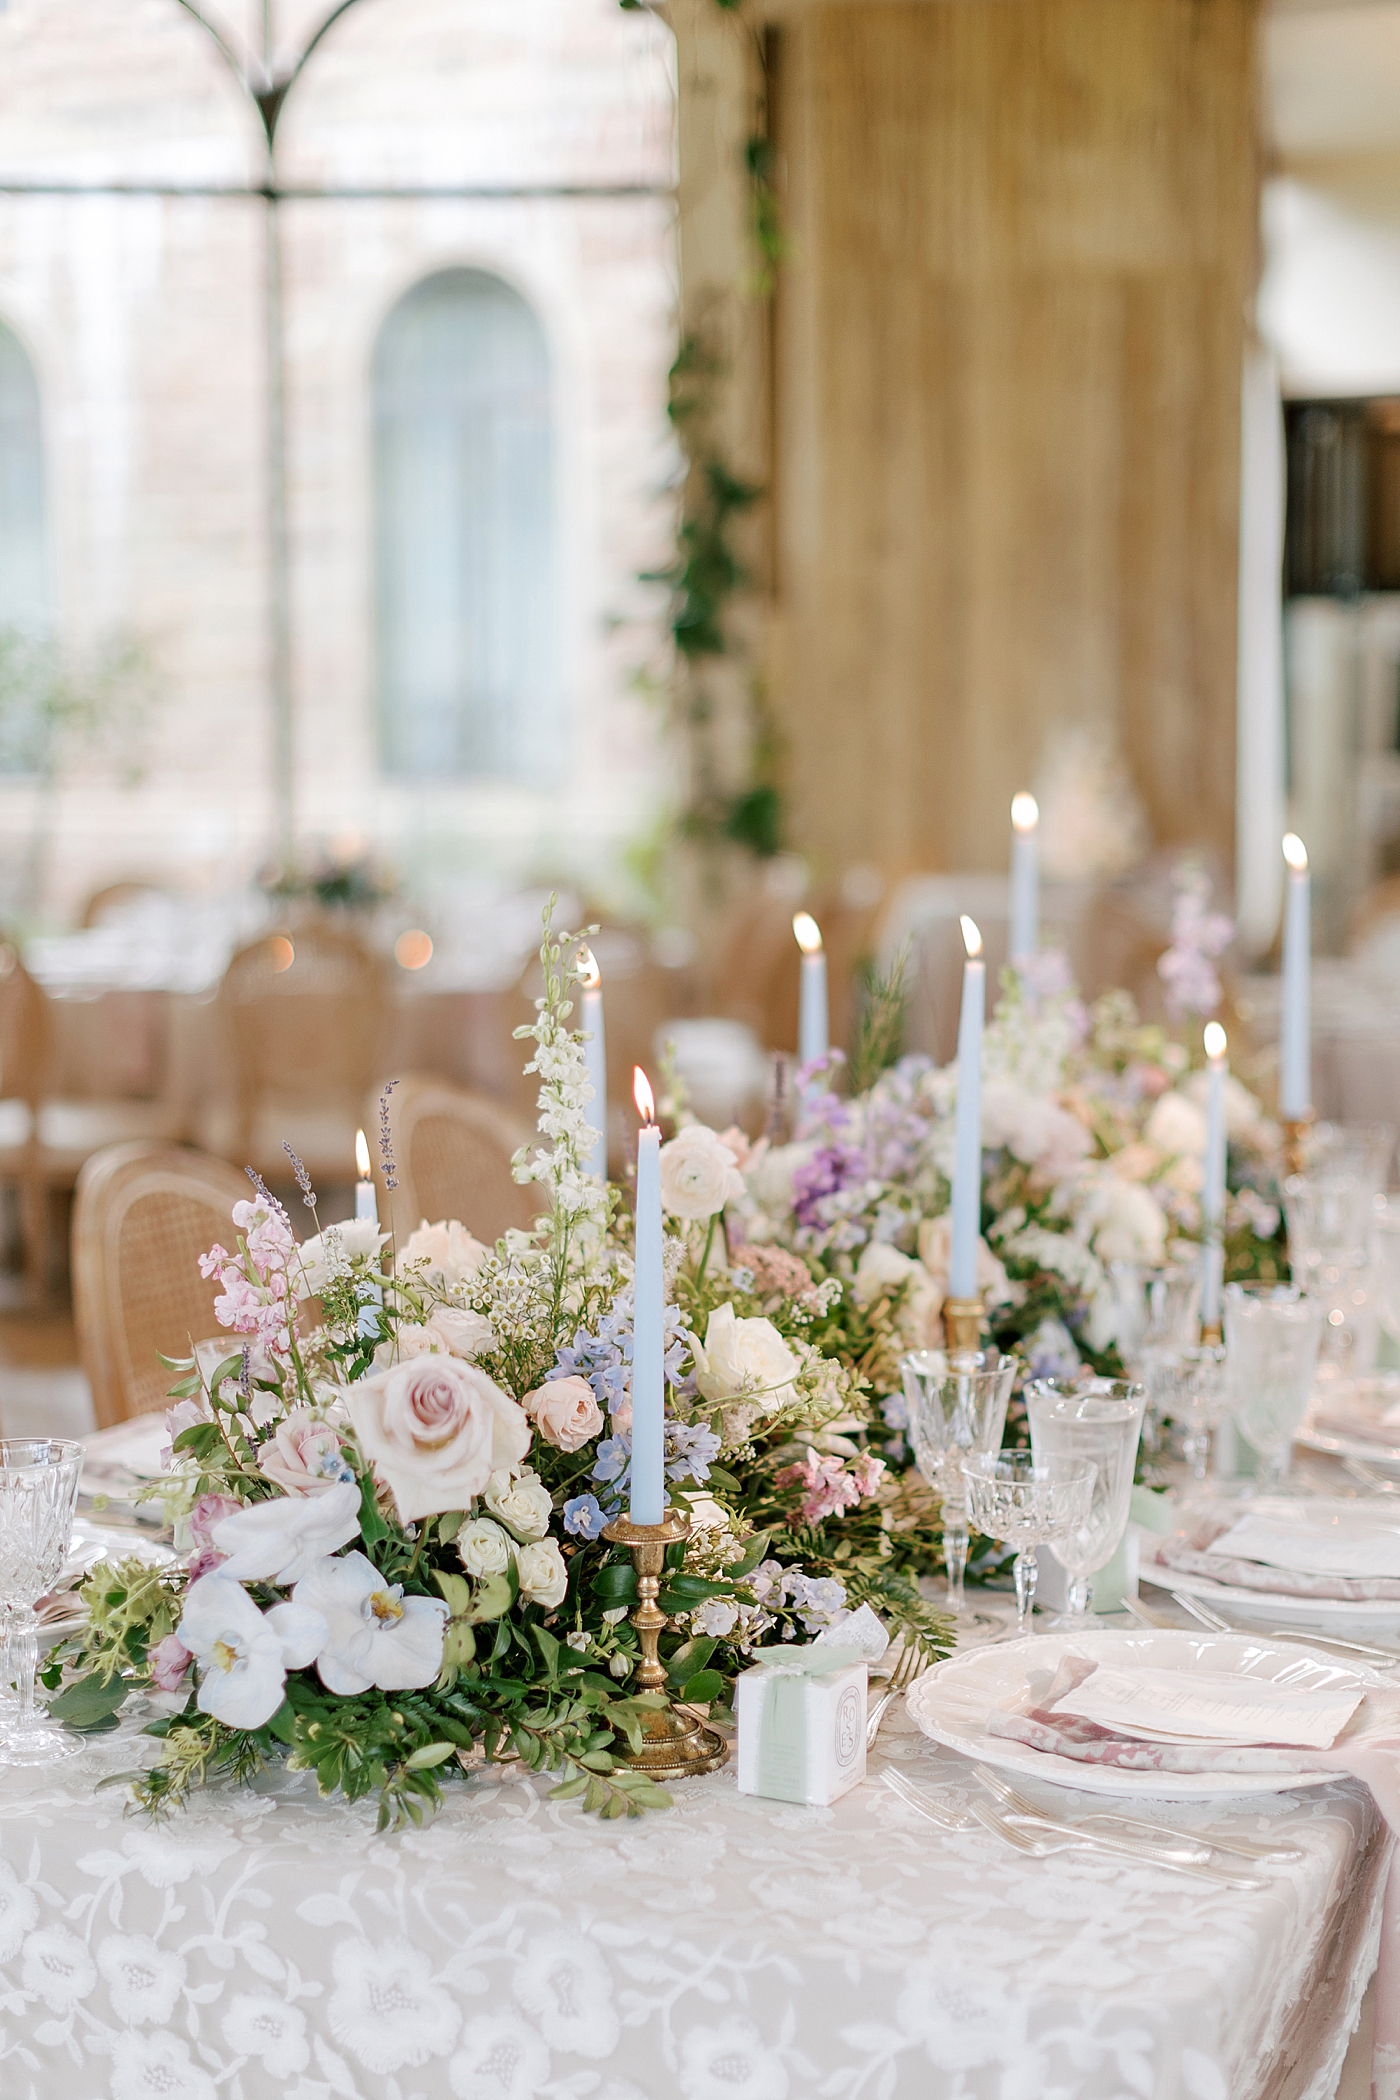 Wedding reception details | Image by Hope Helmuth Photography